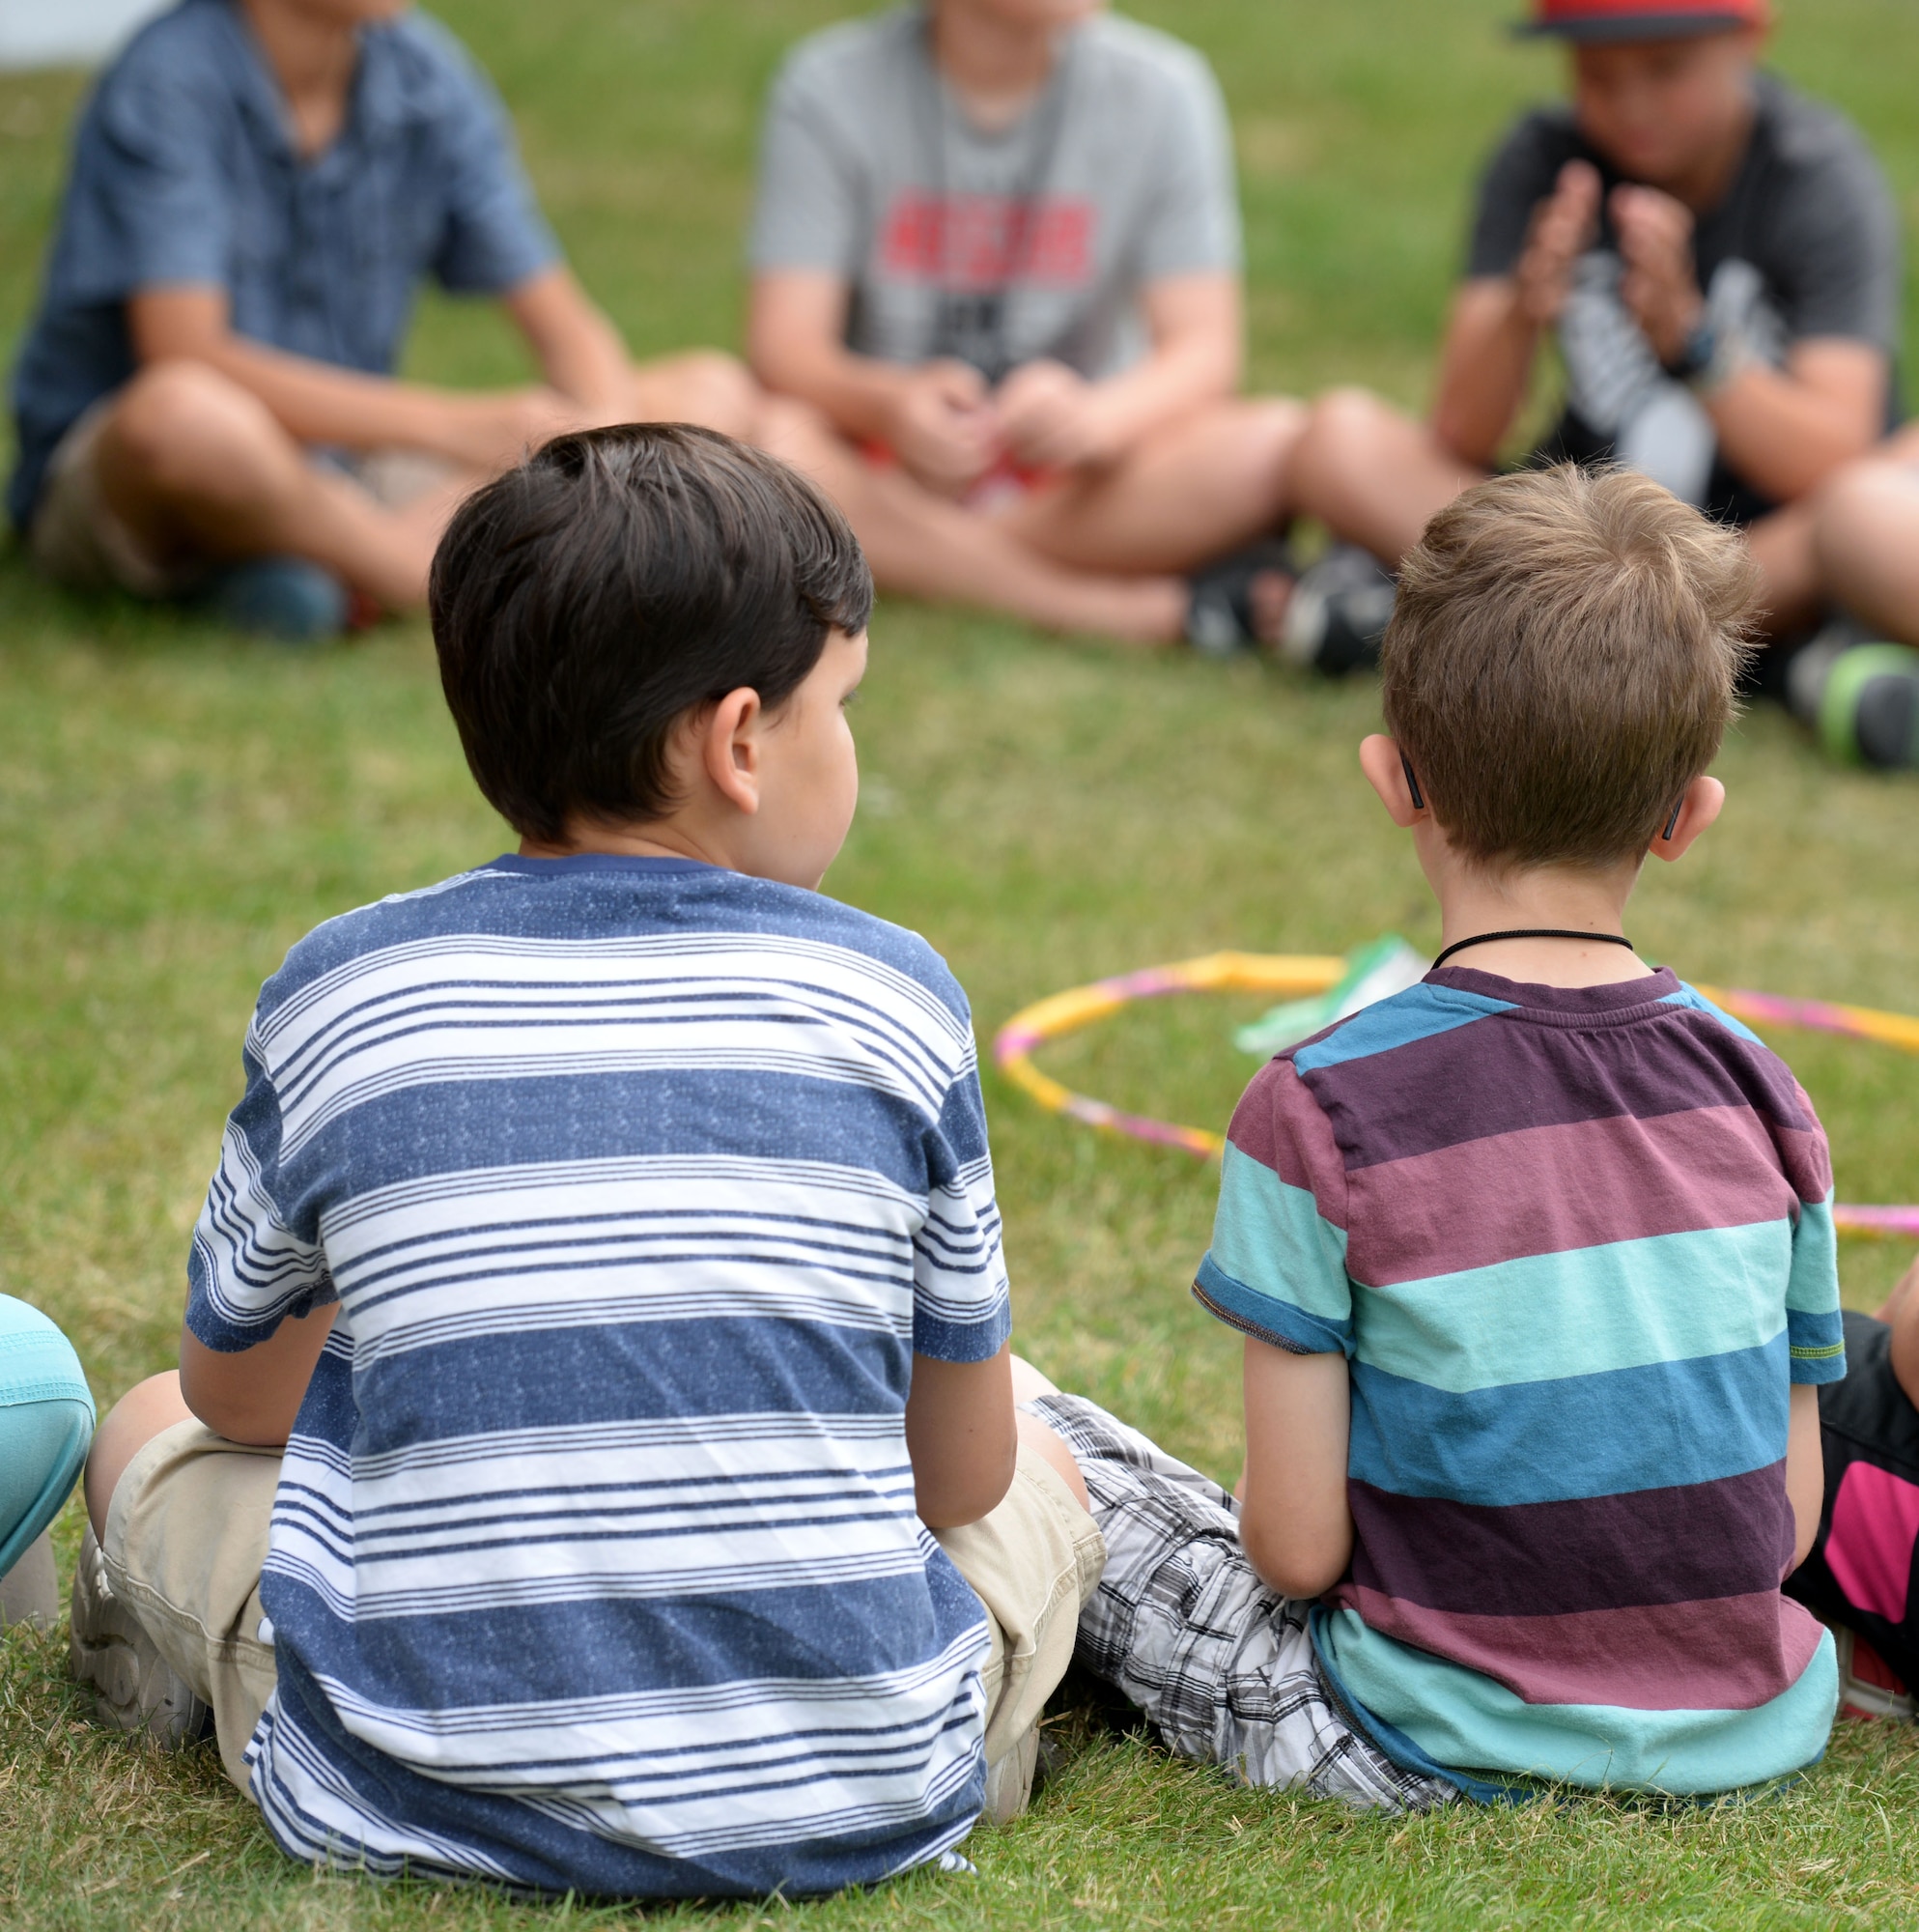 Team Mildenhall children take part in outdoor games during Vacation Bible School July 25, 2016, on RAF Mildenhall, England. The children played team-building games to inspire teamwork and cooperation. (U.S. Air Force photo by Gina Randall)